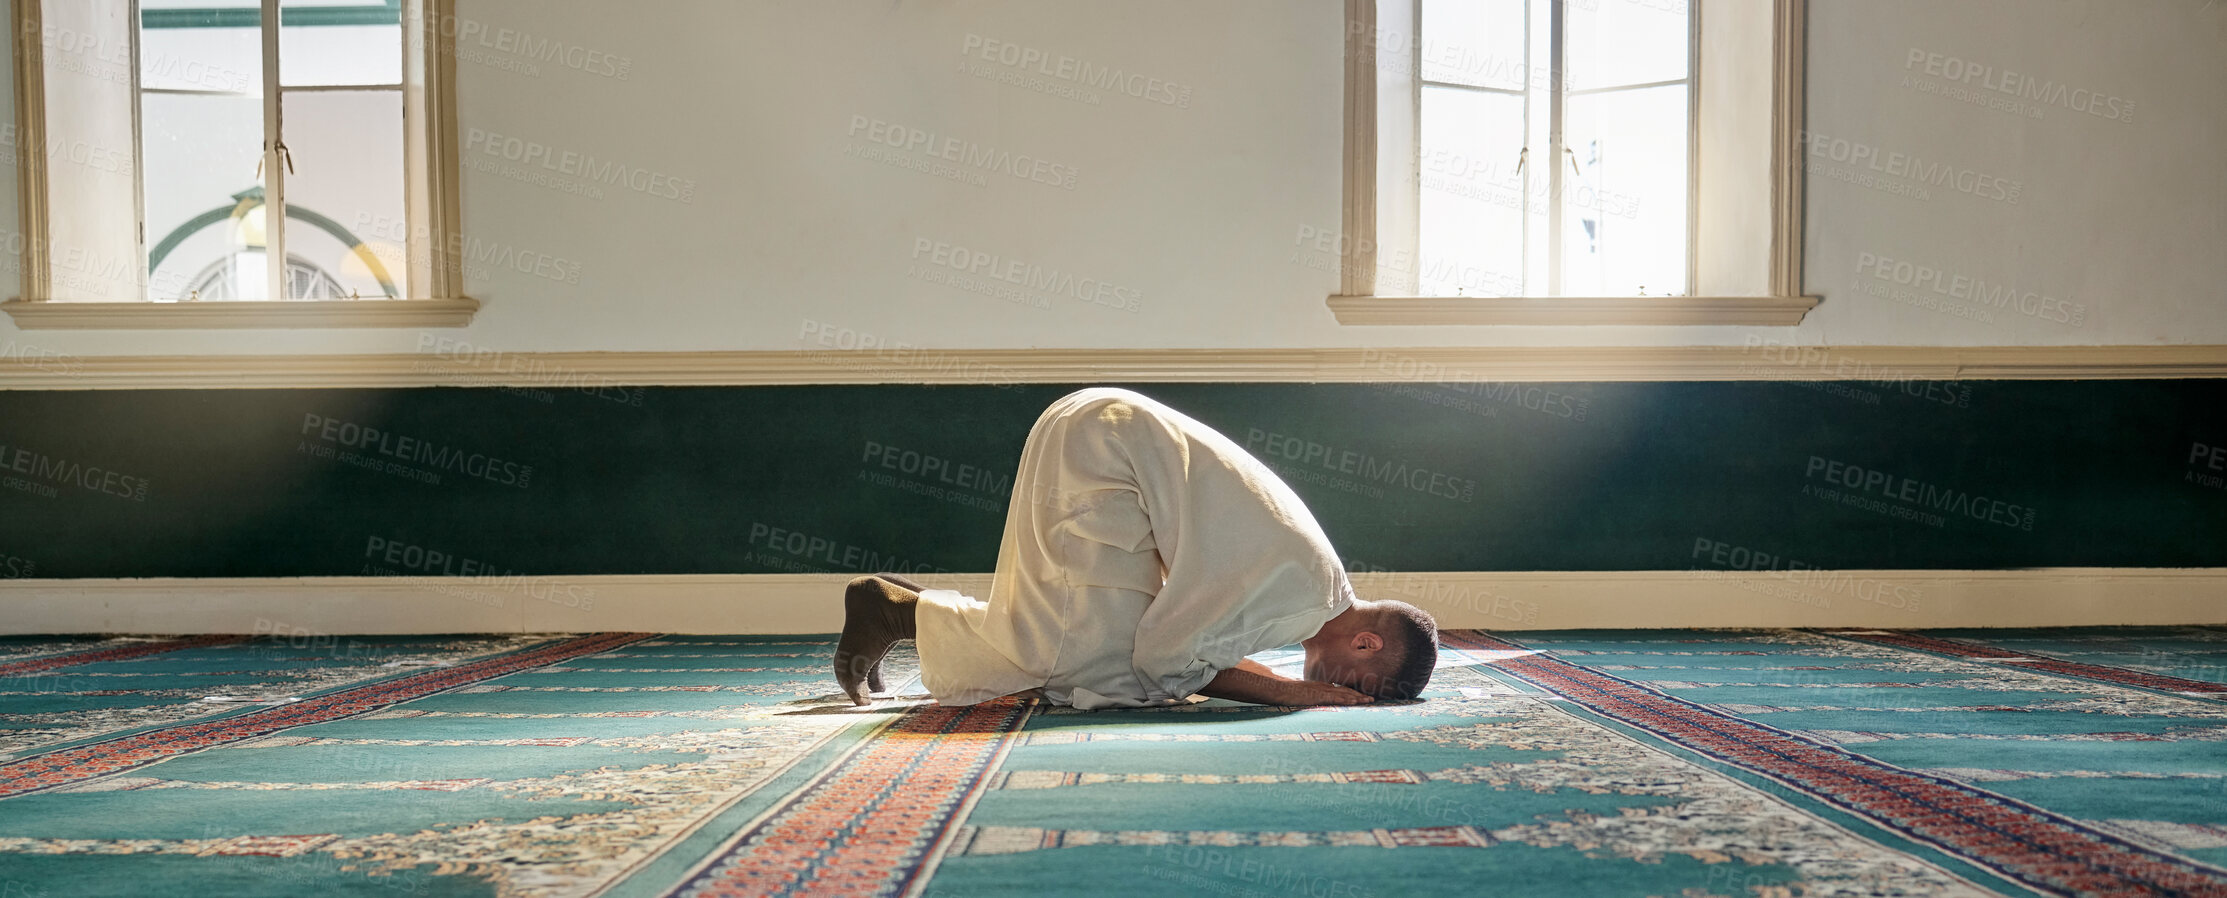 Buy stock photo Mosque, worship and muslim man in prayer on his knees for gratitude, support or ramadan for spiritual wellness. Religion, tradition and islamic guy praying or reciting quran to allah at islam temple.